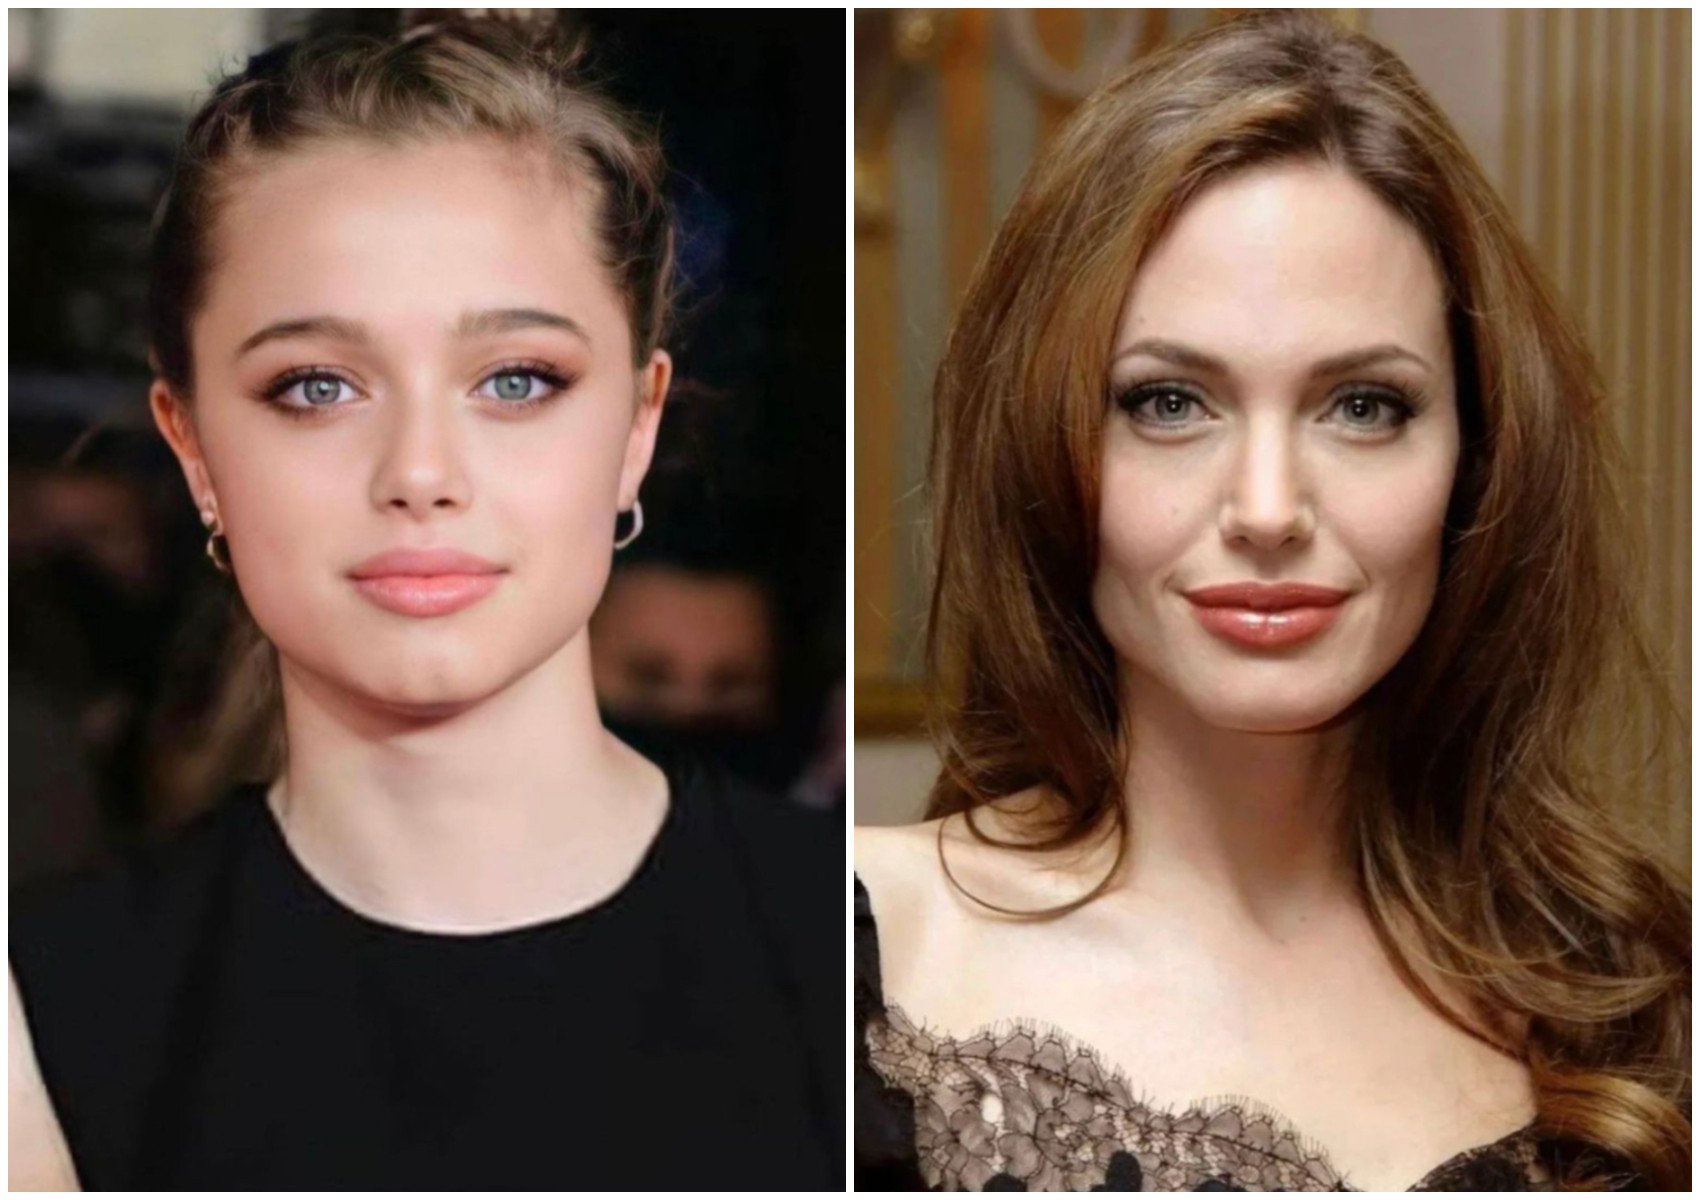 Is Shiloh Jolie-Pitt the next Angelina Jolie? 8 similarities between the mother-daughter duo, from their mirror-image looks and style transformations, to starting out as child stars | South China Morning Post